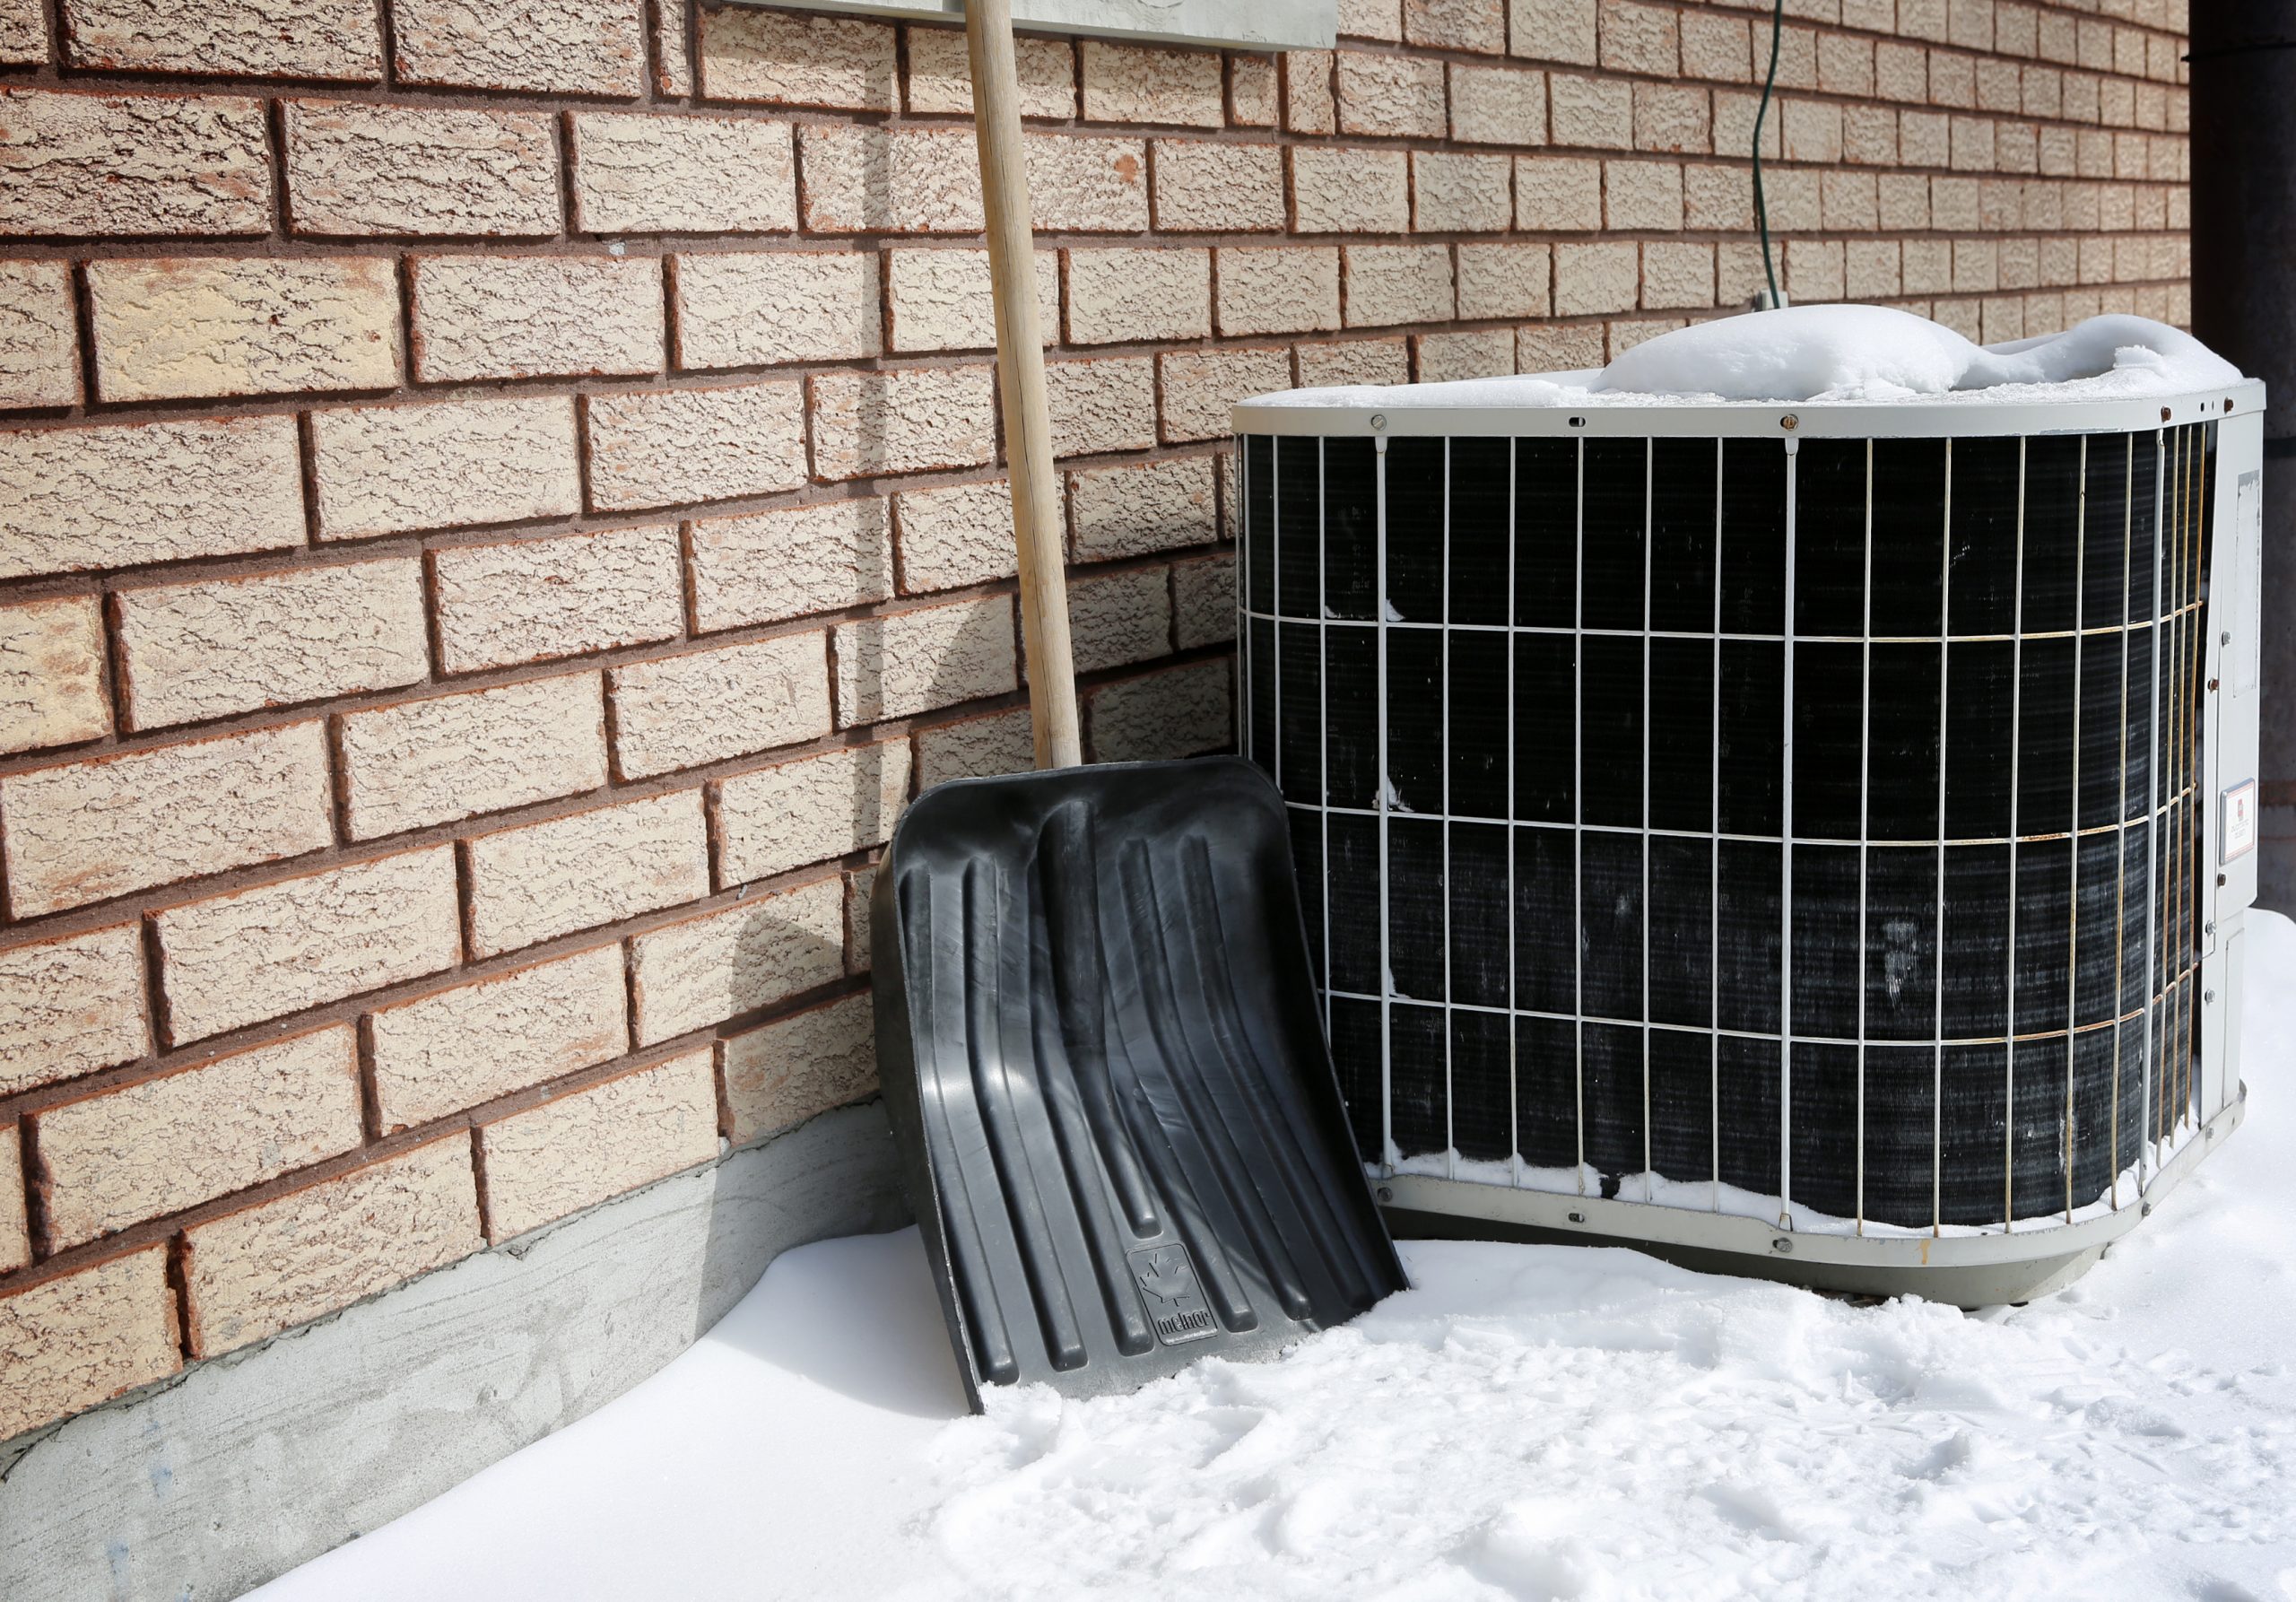 What Should I Do to Prepare My Heating System for Winter?